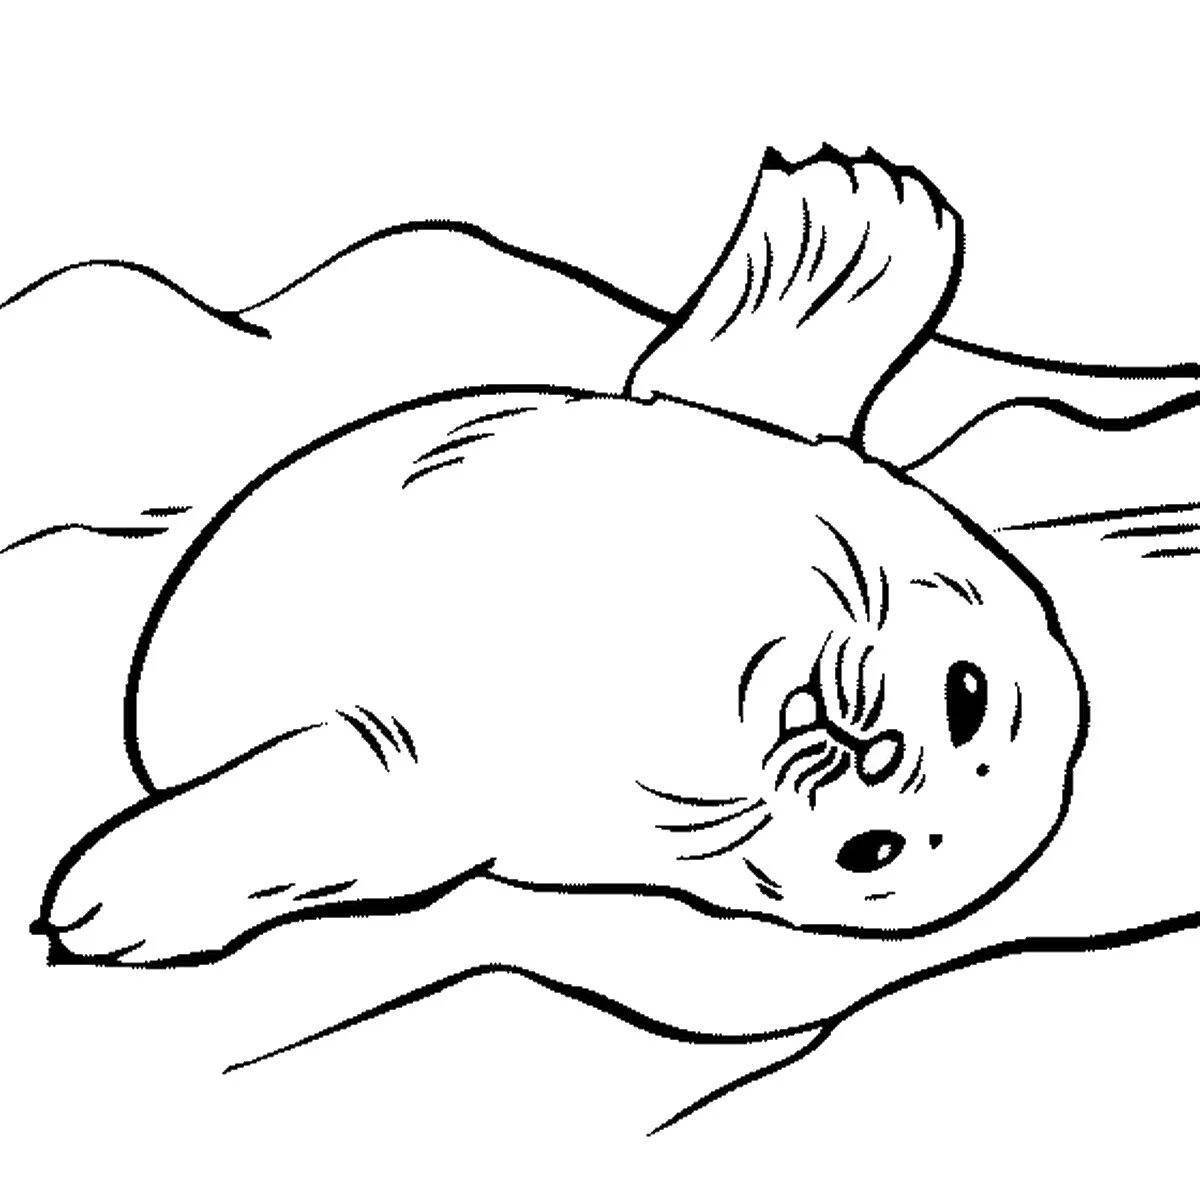 A fun coloring book for kids with the Baikal seal